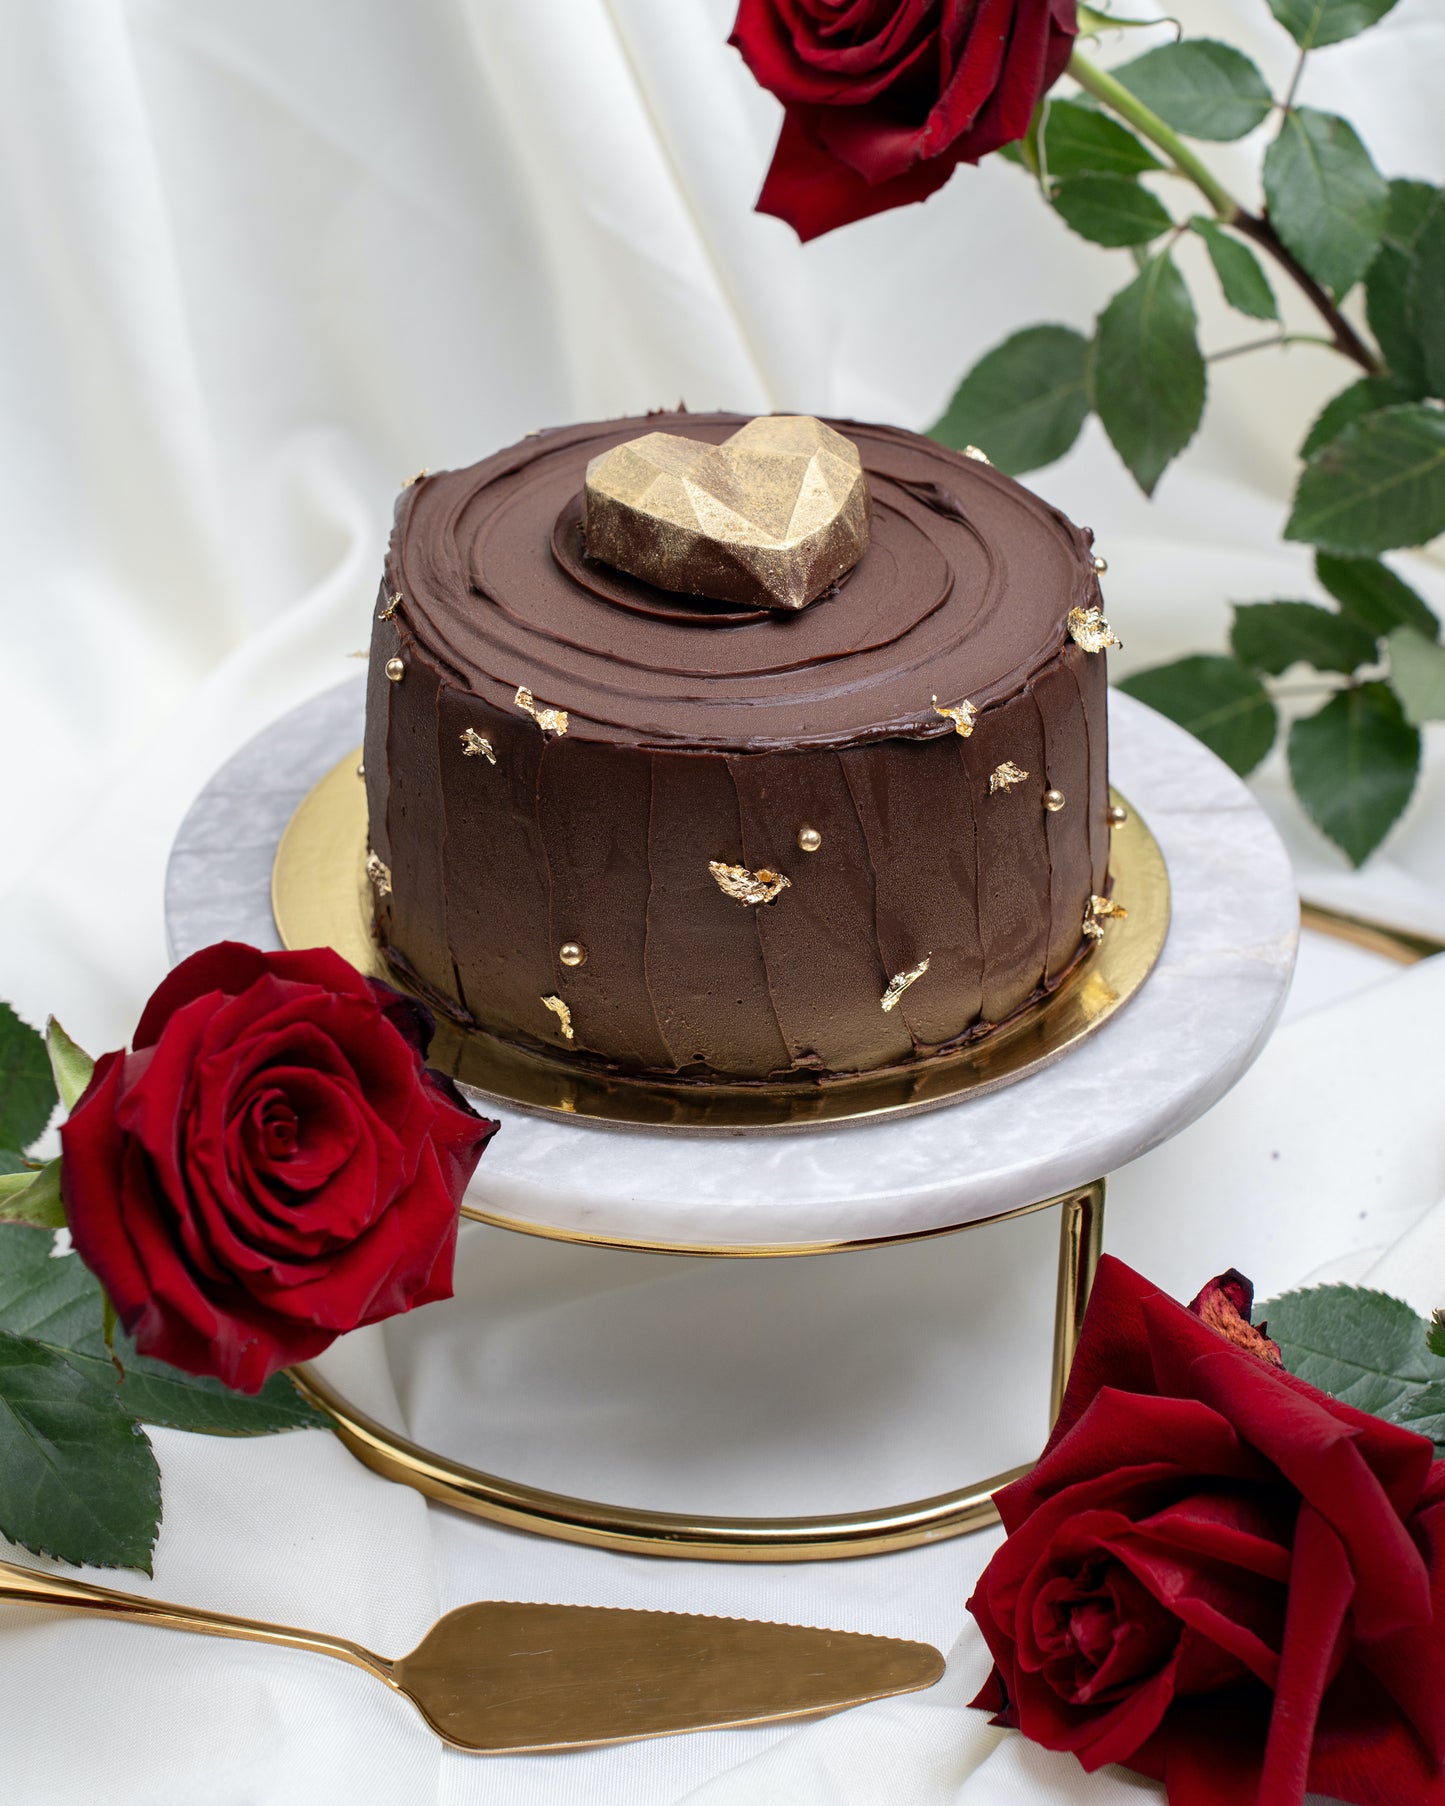 Limited Edition Chocolate Salted Caramel Cake